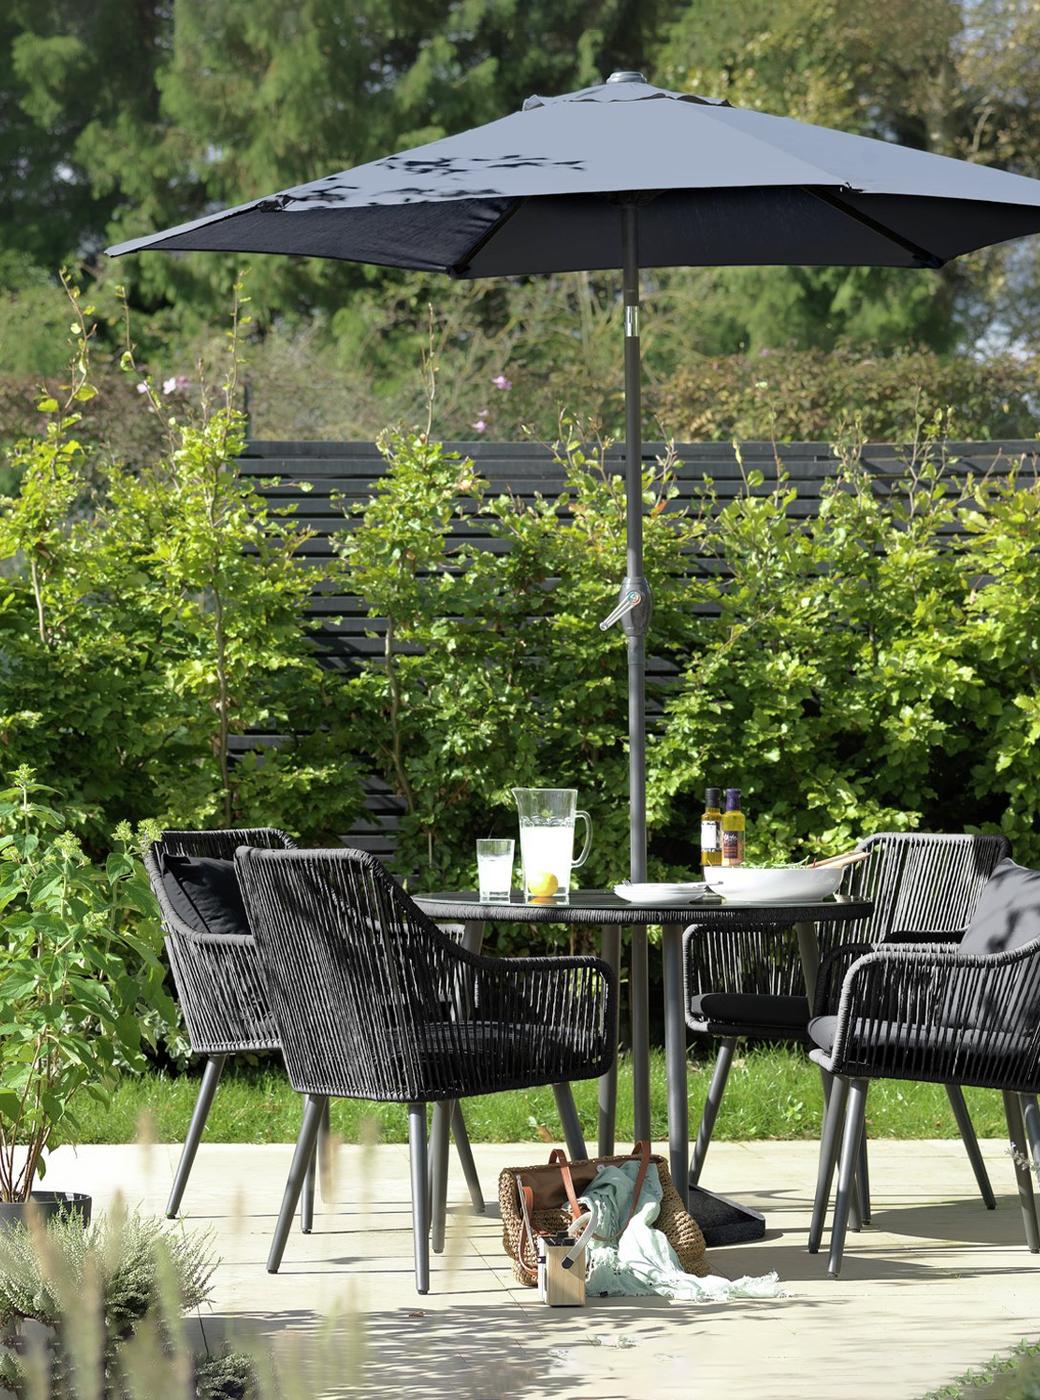 Planning on entertaining? Shop patio sets, perfect for hosting 